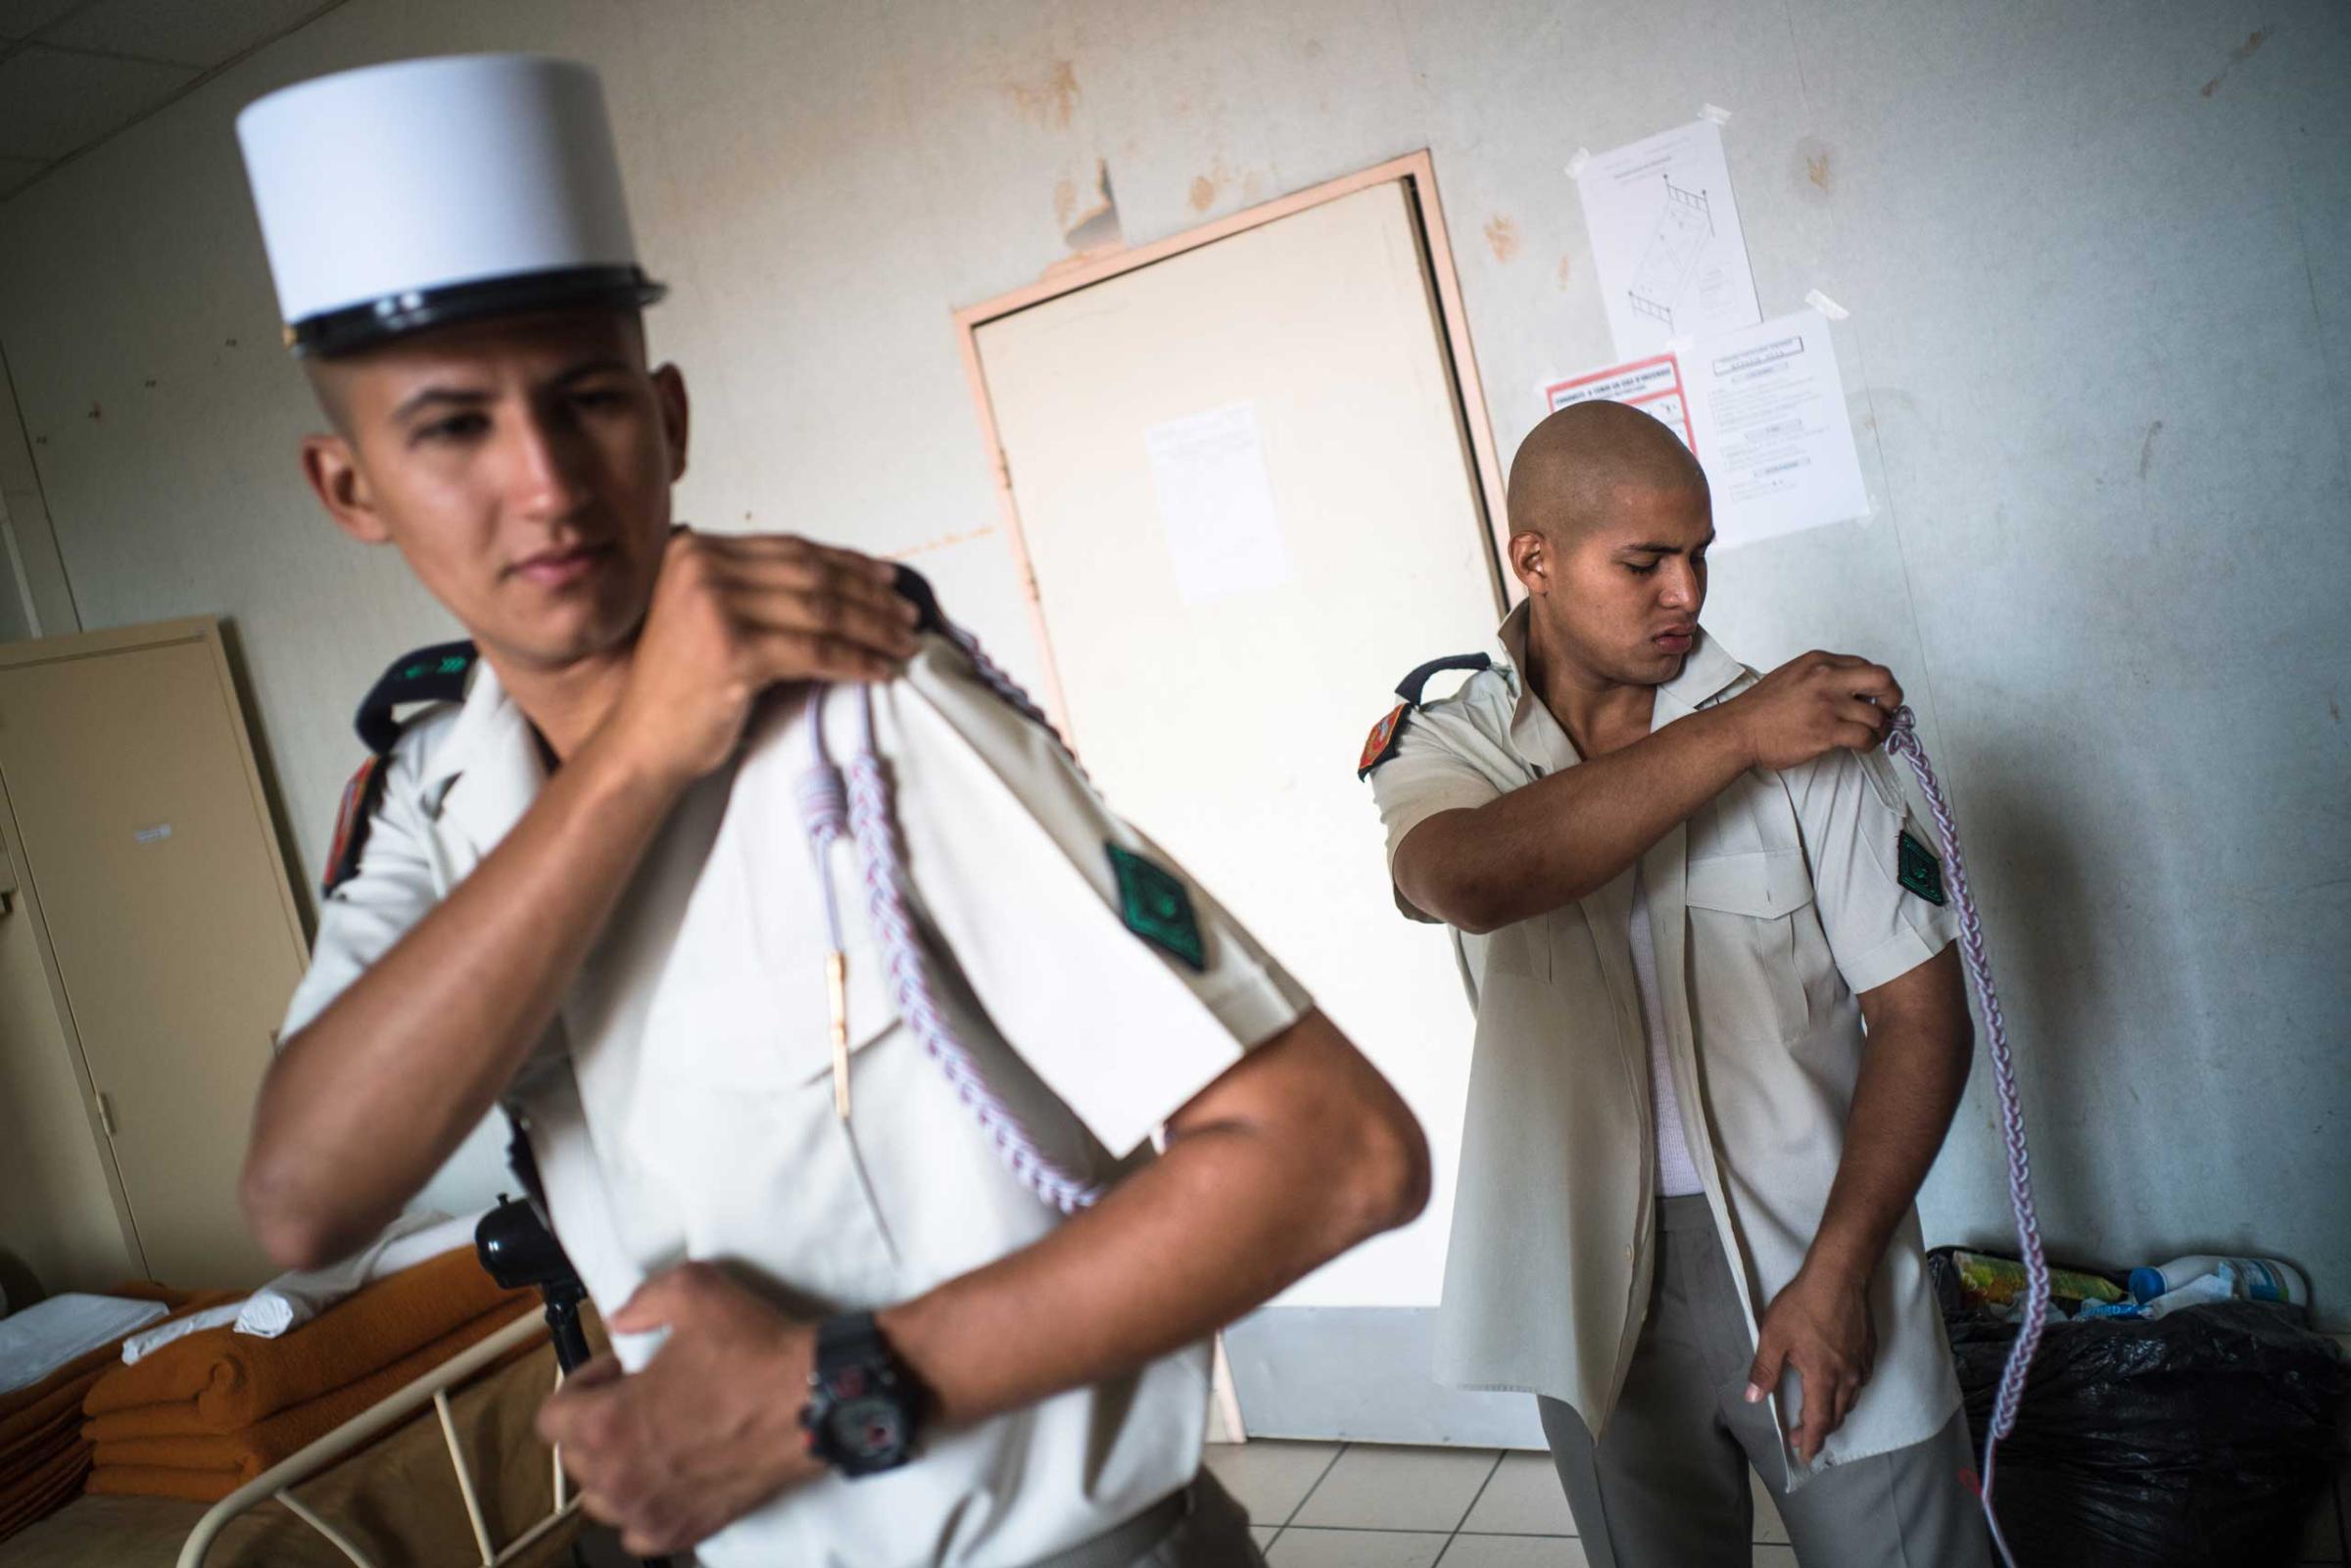 Two members of the French Foreign Legion get ready for the weekend. Nimes, France. Aug. 12, 2015.